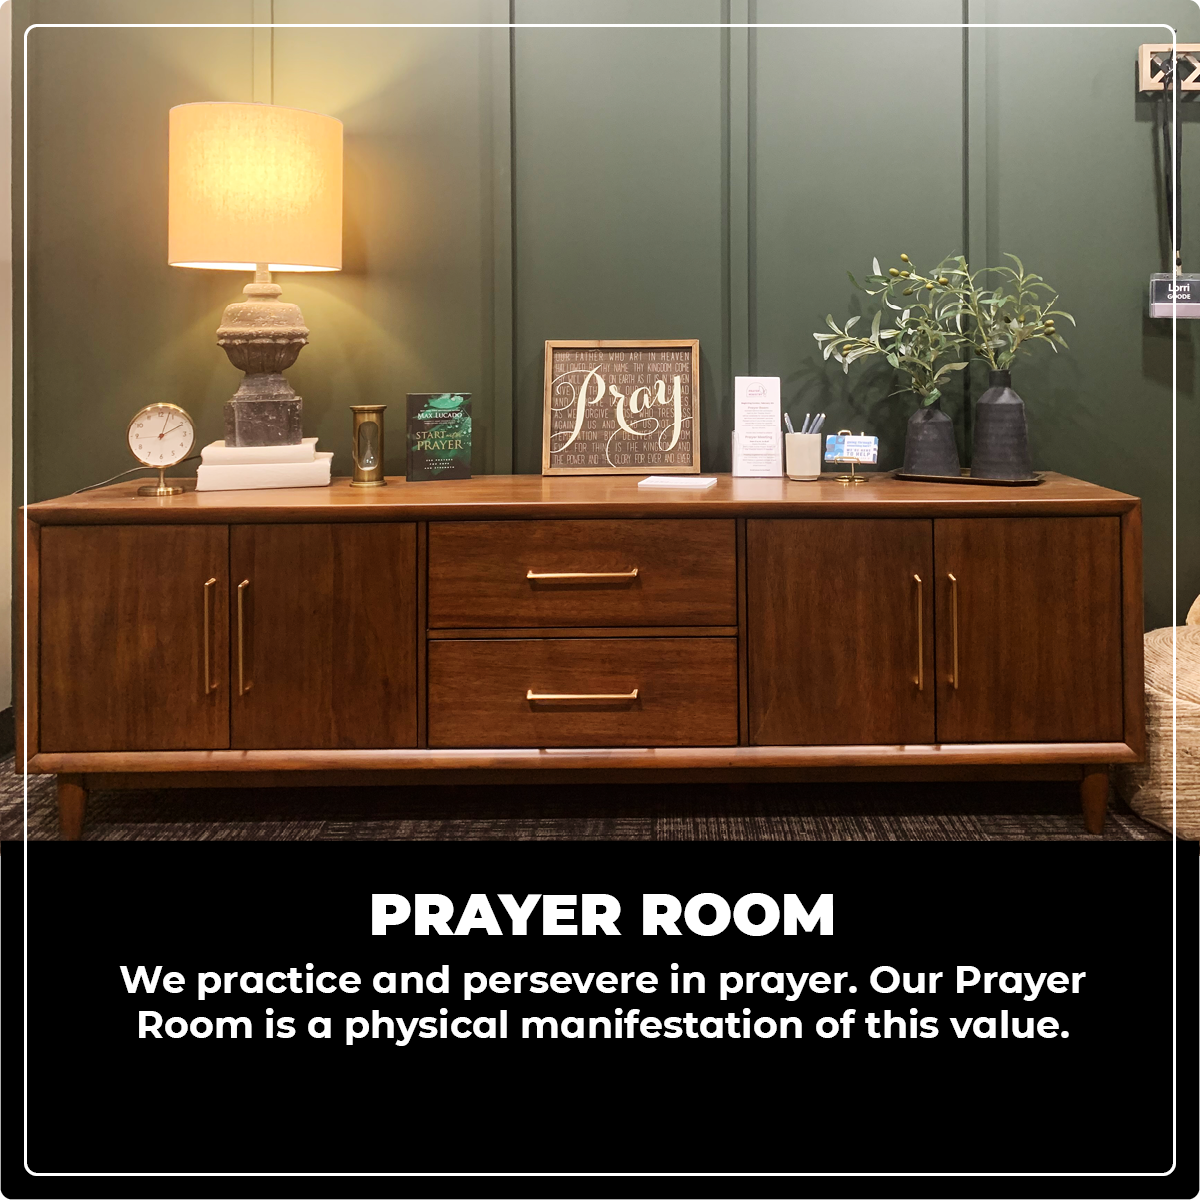 Prayer room: We practice and persevere in prayer. Our Prayer Room is a physical manifestation of this value.